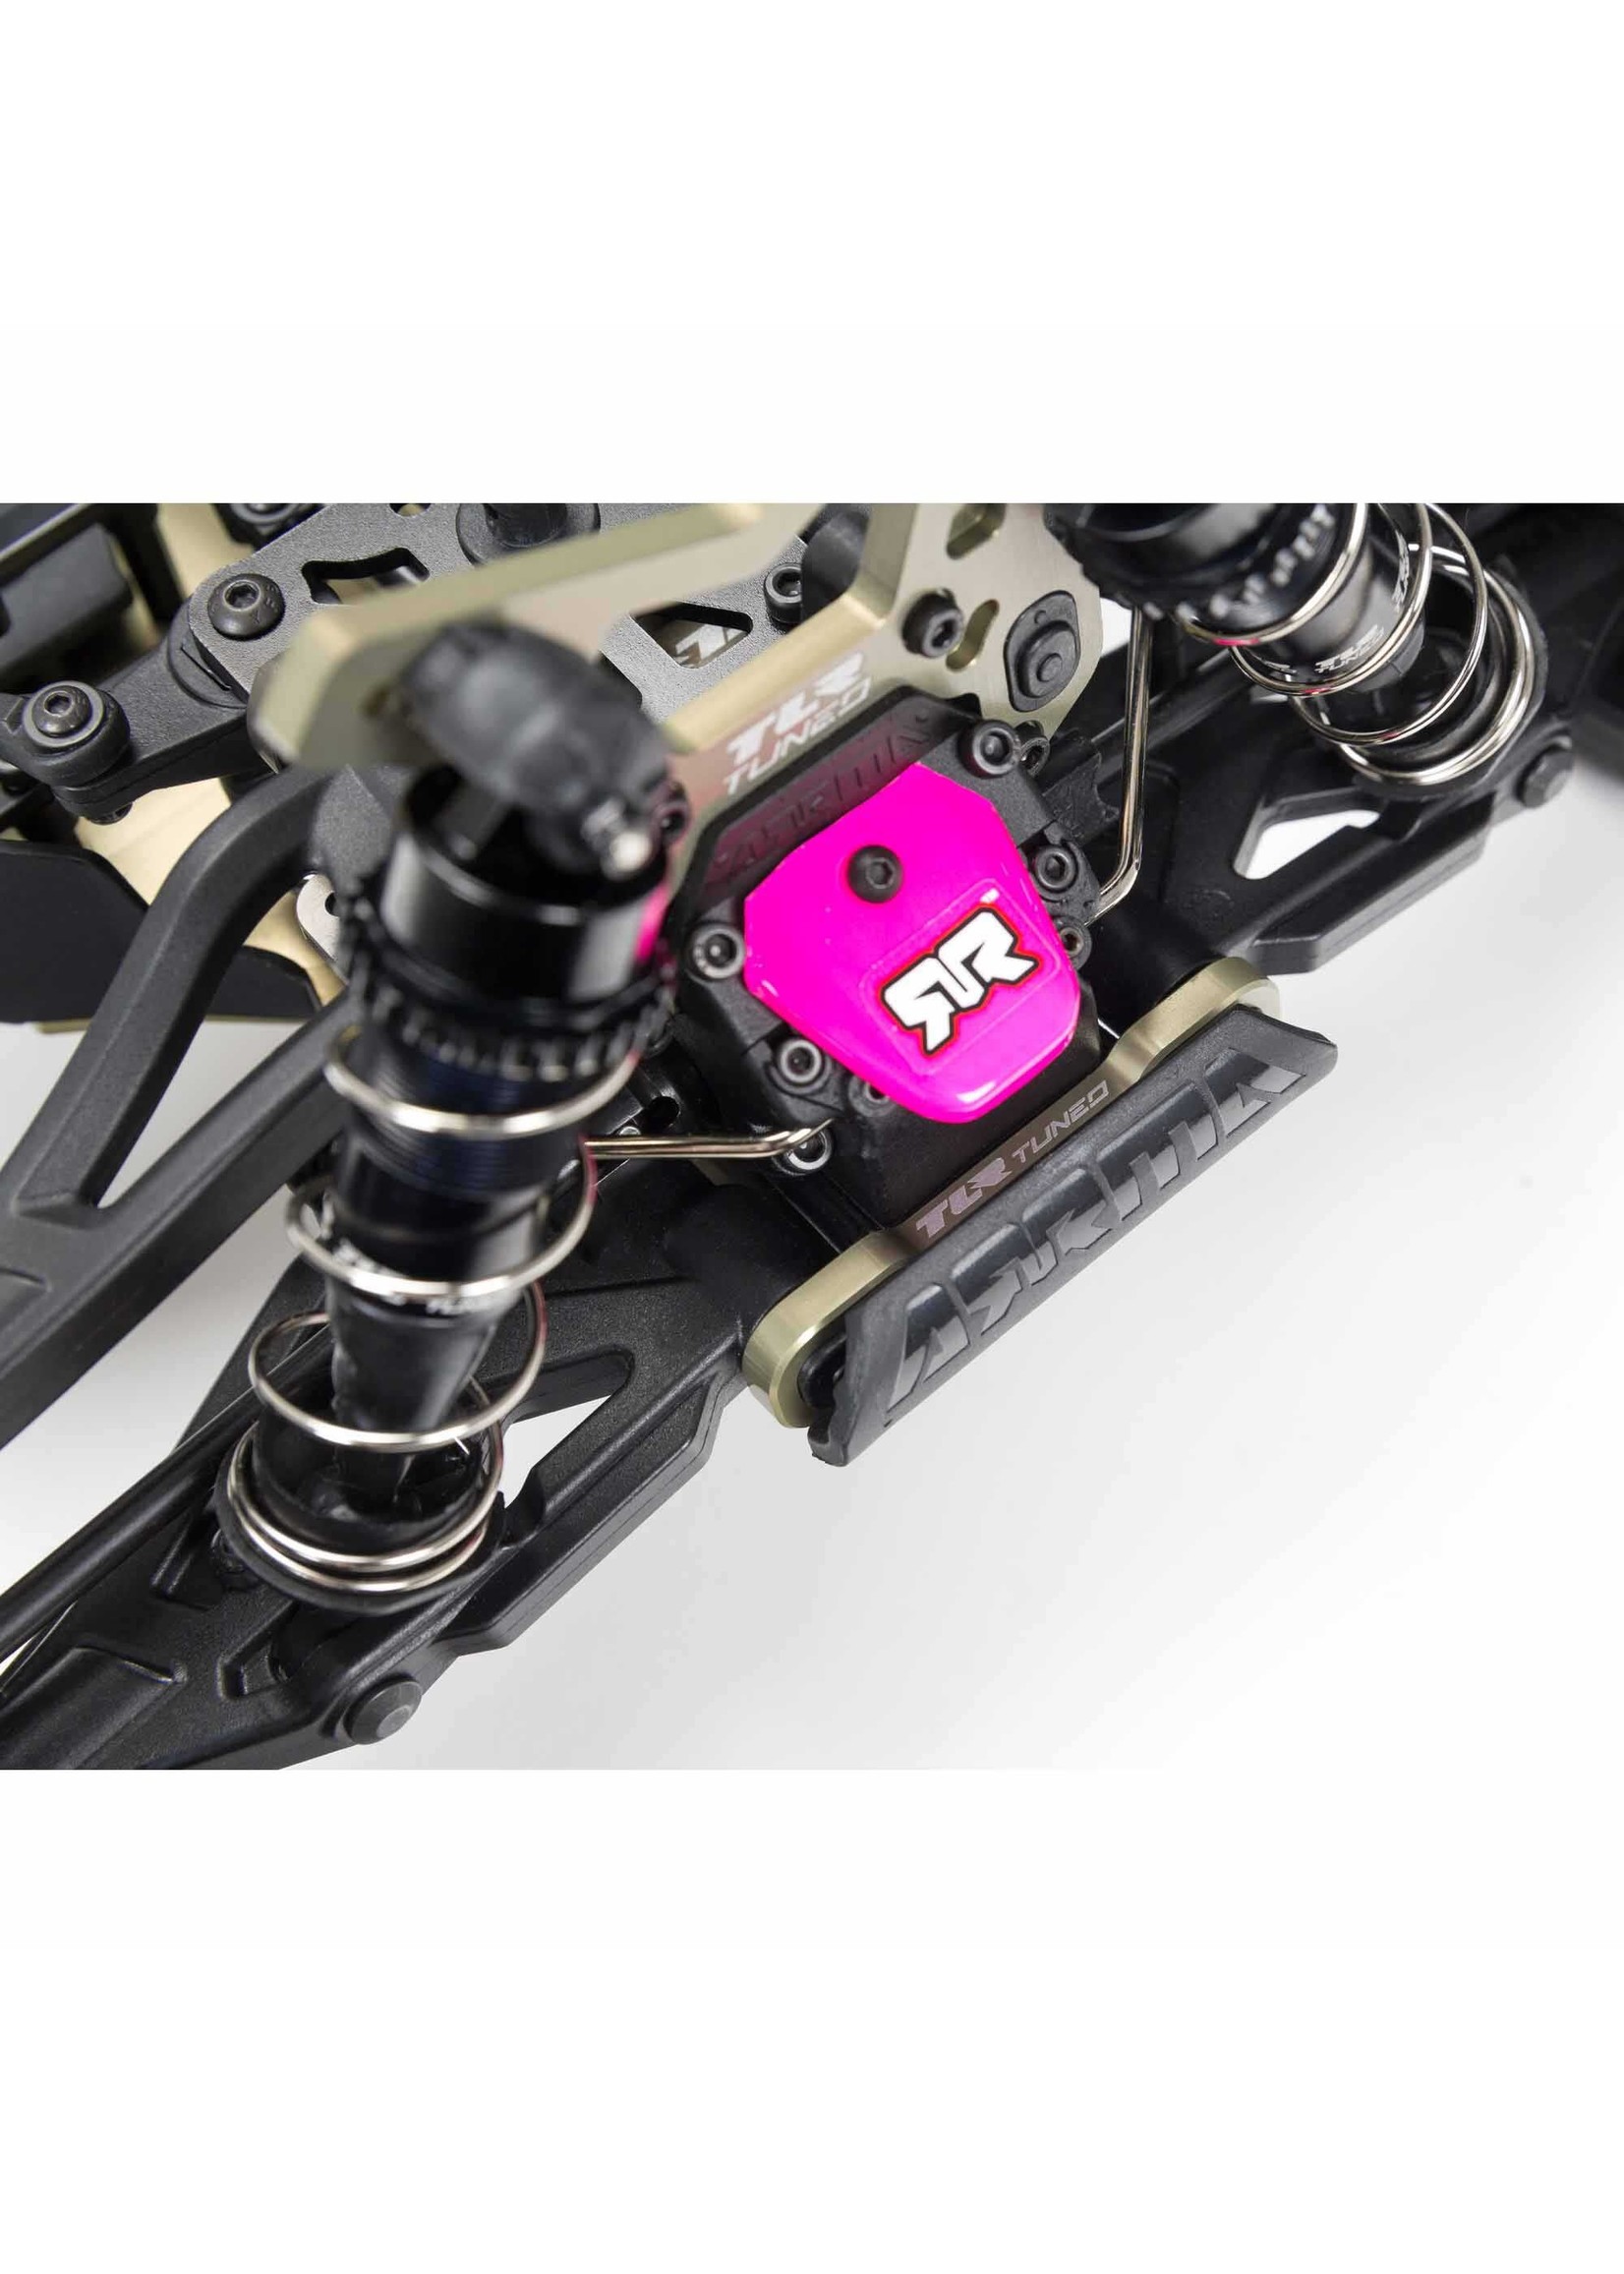 Arrma 1/8 TLR Tuned TYPHON 4WD Roller Buggy - Pink/Purple